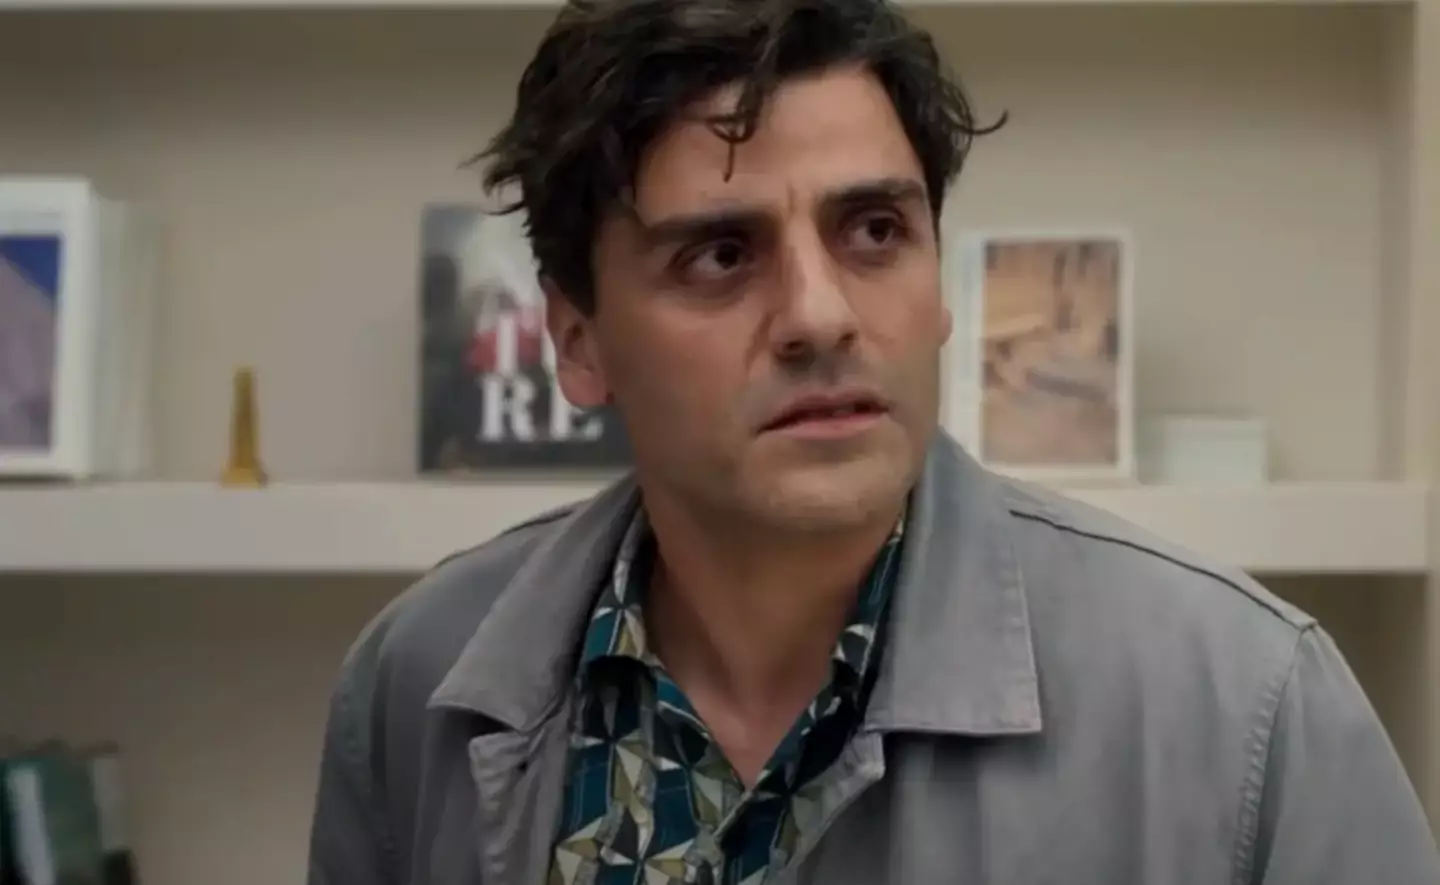 Oscar Isaac has been praised for his performance.